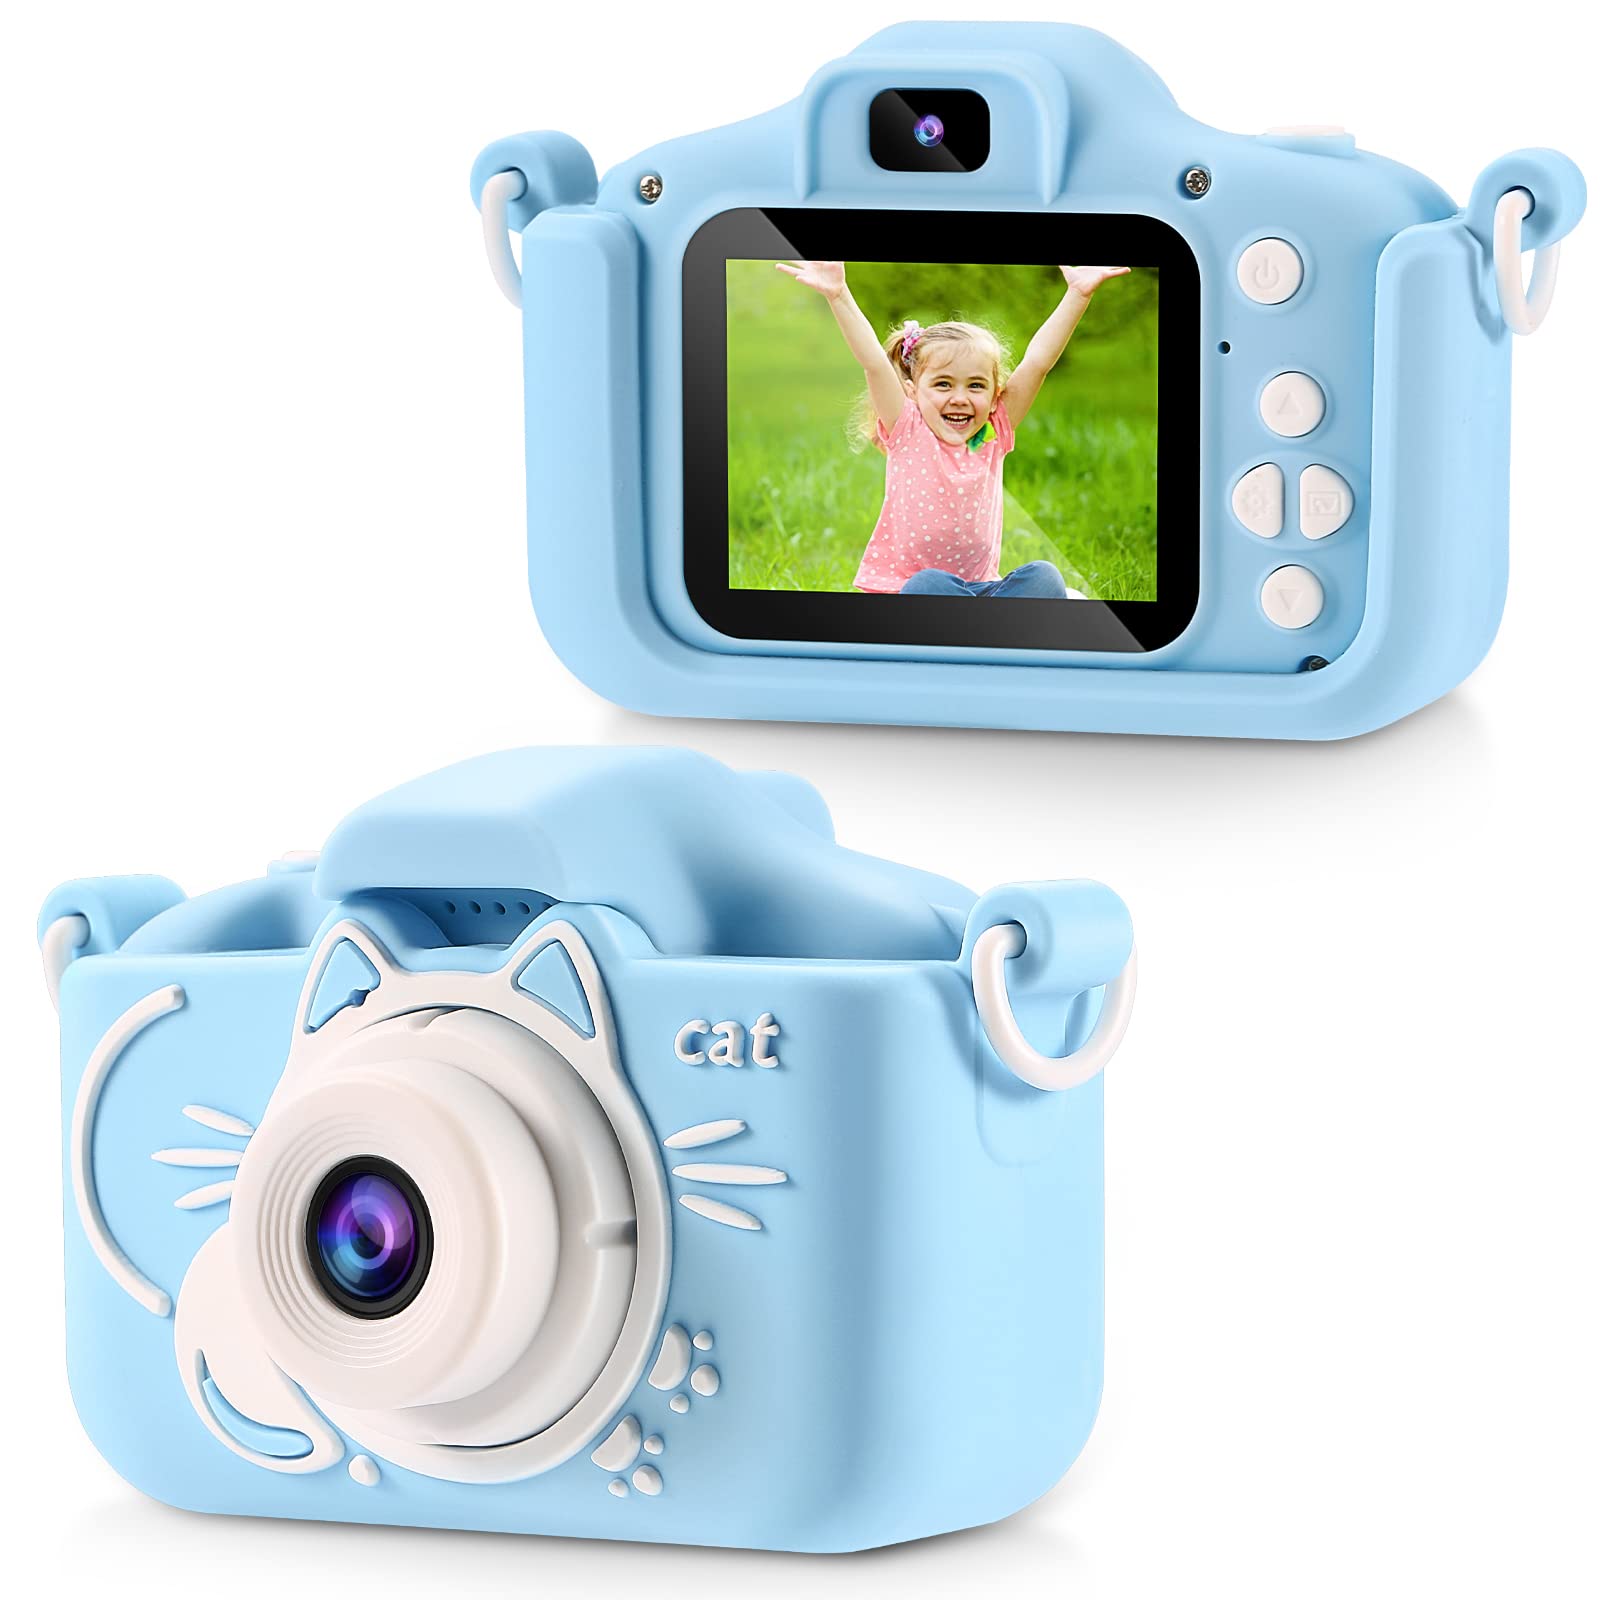 Kids Camera for Boys,2 Lens Selfie Kids Camera,HD Kids Digital Camera Toys for 4 5 6 7 8 9 Year Old Boy Christmas Birthday Gifts,MP3 Player,Camera for Kids 10-12,Toddler Camera with 32GB-Card Blue